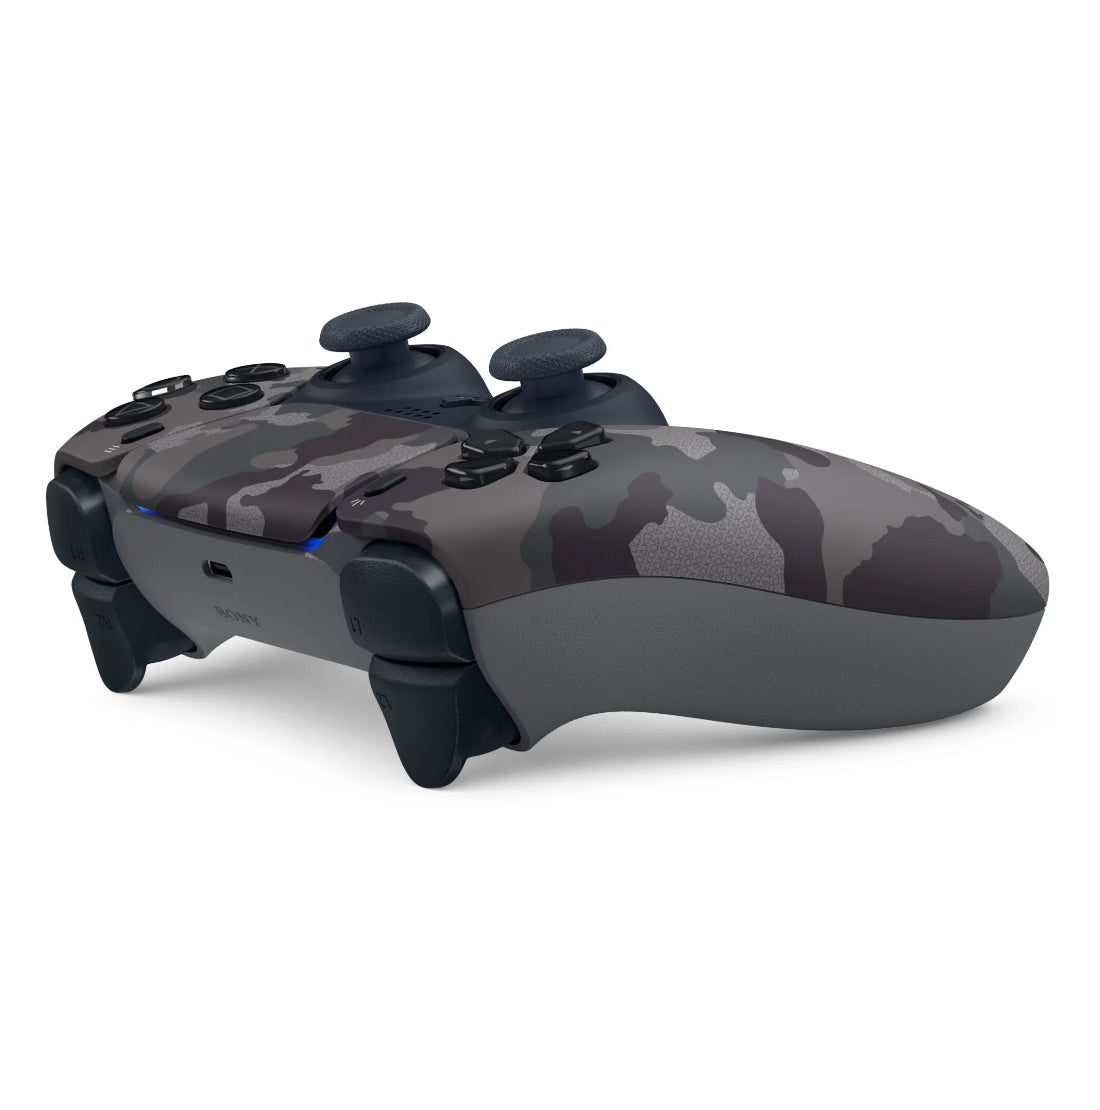 Sony Playstation 5 Digital Edition Bundle with Extra Gray Camo Controller, Black PULSE 3D Wireless Headset and Play and Charge Kit - Pro-Distributing